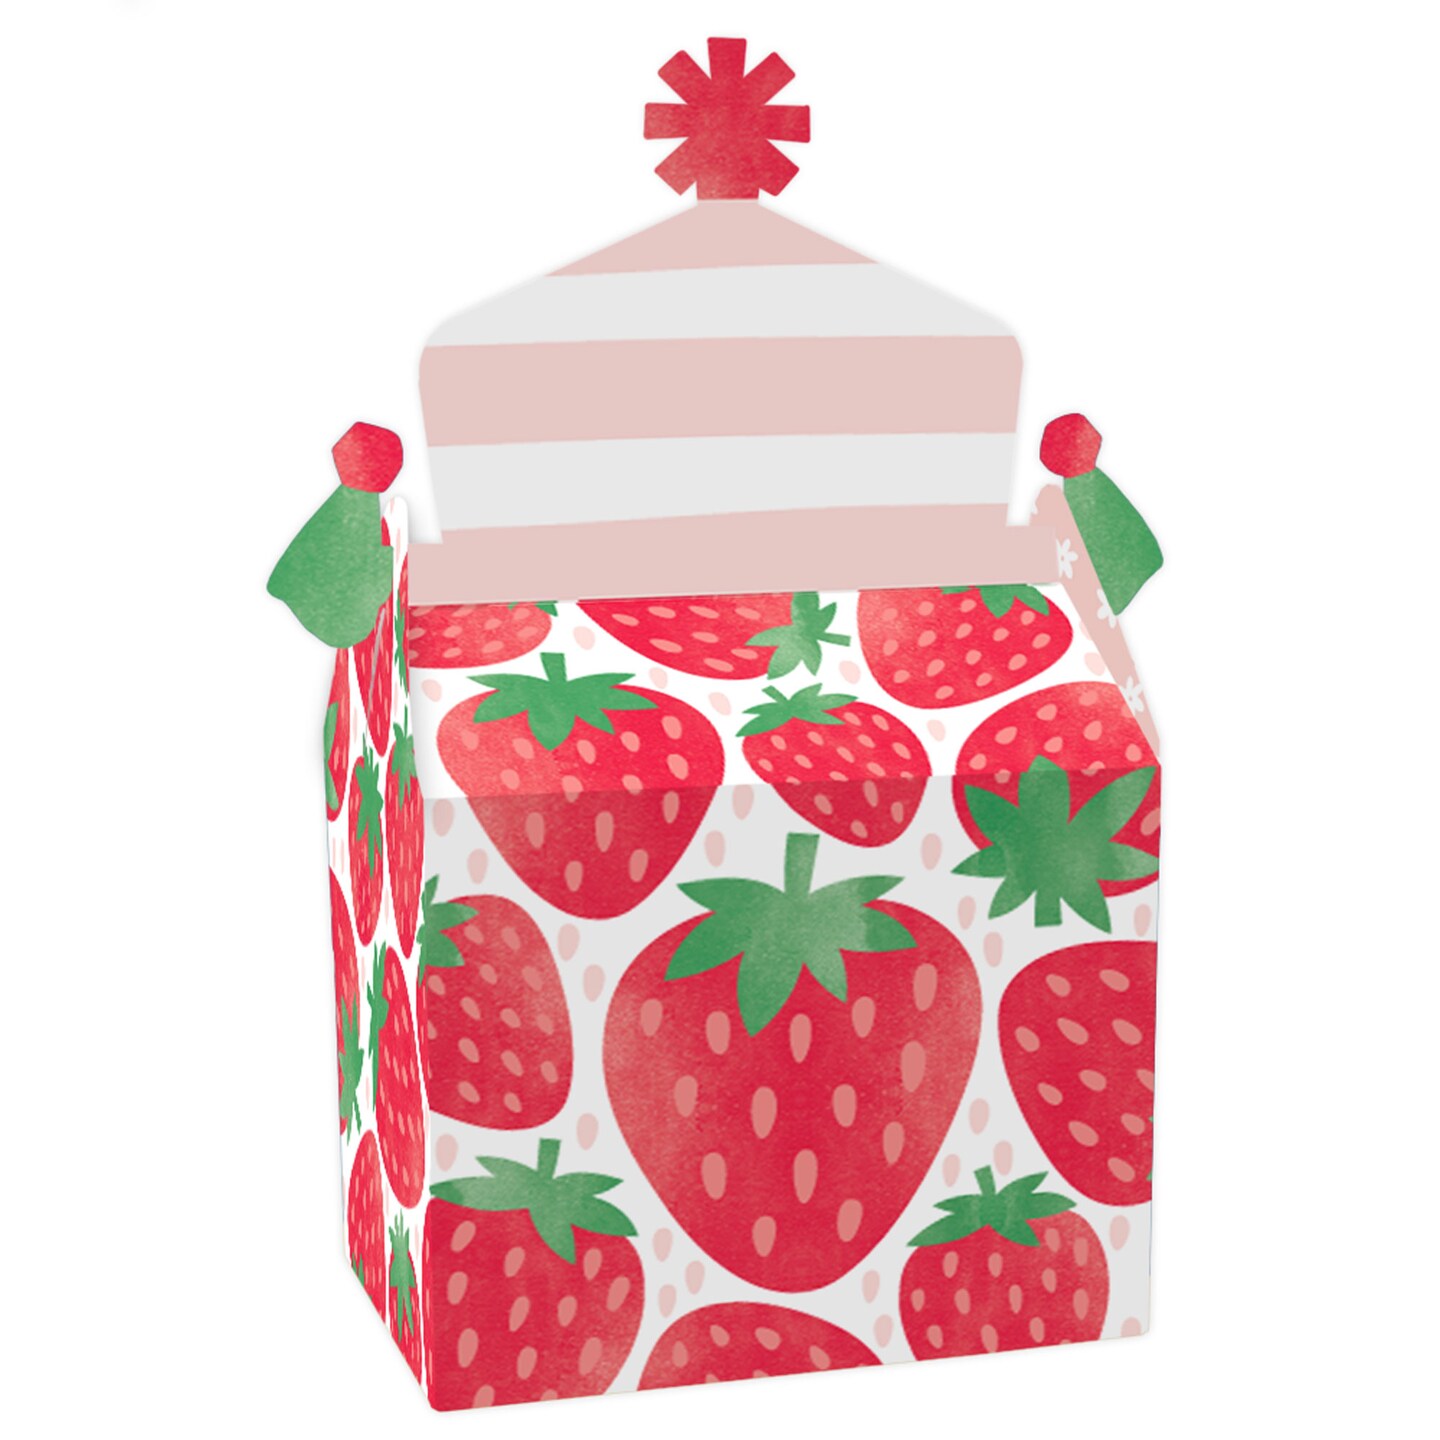 Big Dot of Happiness Berry Sweet Strawberry - Treat Box Party Favors - Fruit Themed Birthday Party or Baby Shower Goodie Gable Boxes - Set of 12